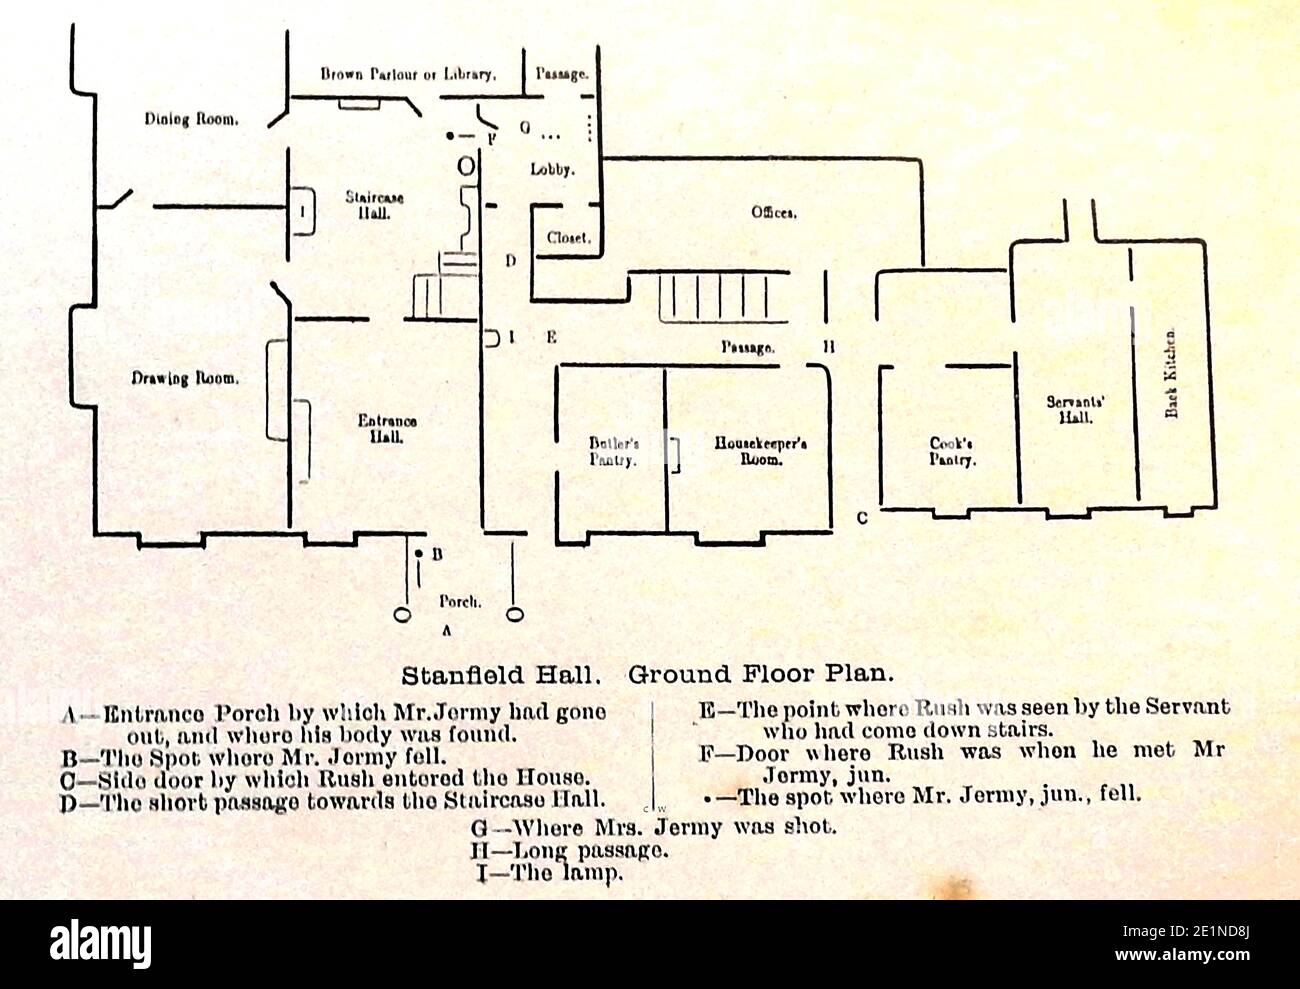 STANFIELD HALL, GROUND FLOOR PLAN. The Murders at Stanfield Hall , Norfolk, England, was a notorious Victorian  double murder on 28 November 1848 .The victims, Isaac Jermy and his son Jermy Jermy were shot and killed on the porch and in the hallway of their mansion. They  were murdered by  James Bloomfield Rush (1800–1849), a tenant-farmer at Potash Farm, who had conducted a  devious scheme to defraud the family and murder them. He was tried and was hanged at Norwich Castle on 21 April 1849. The unwitting accomplice was Emily Sandford, their governess and Rush's pregnant mistress. Stock Photo